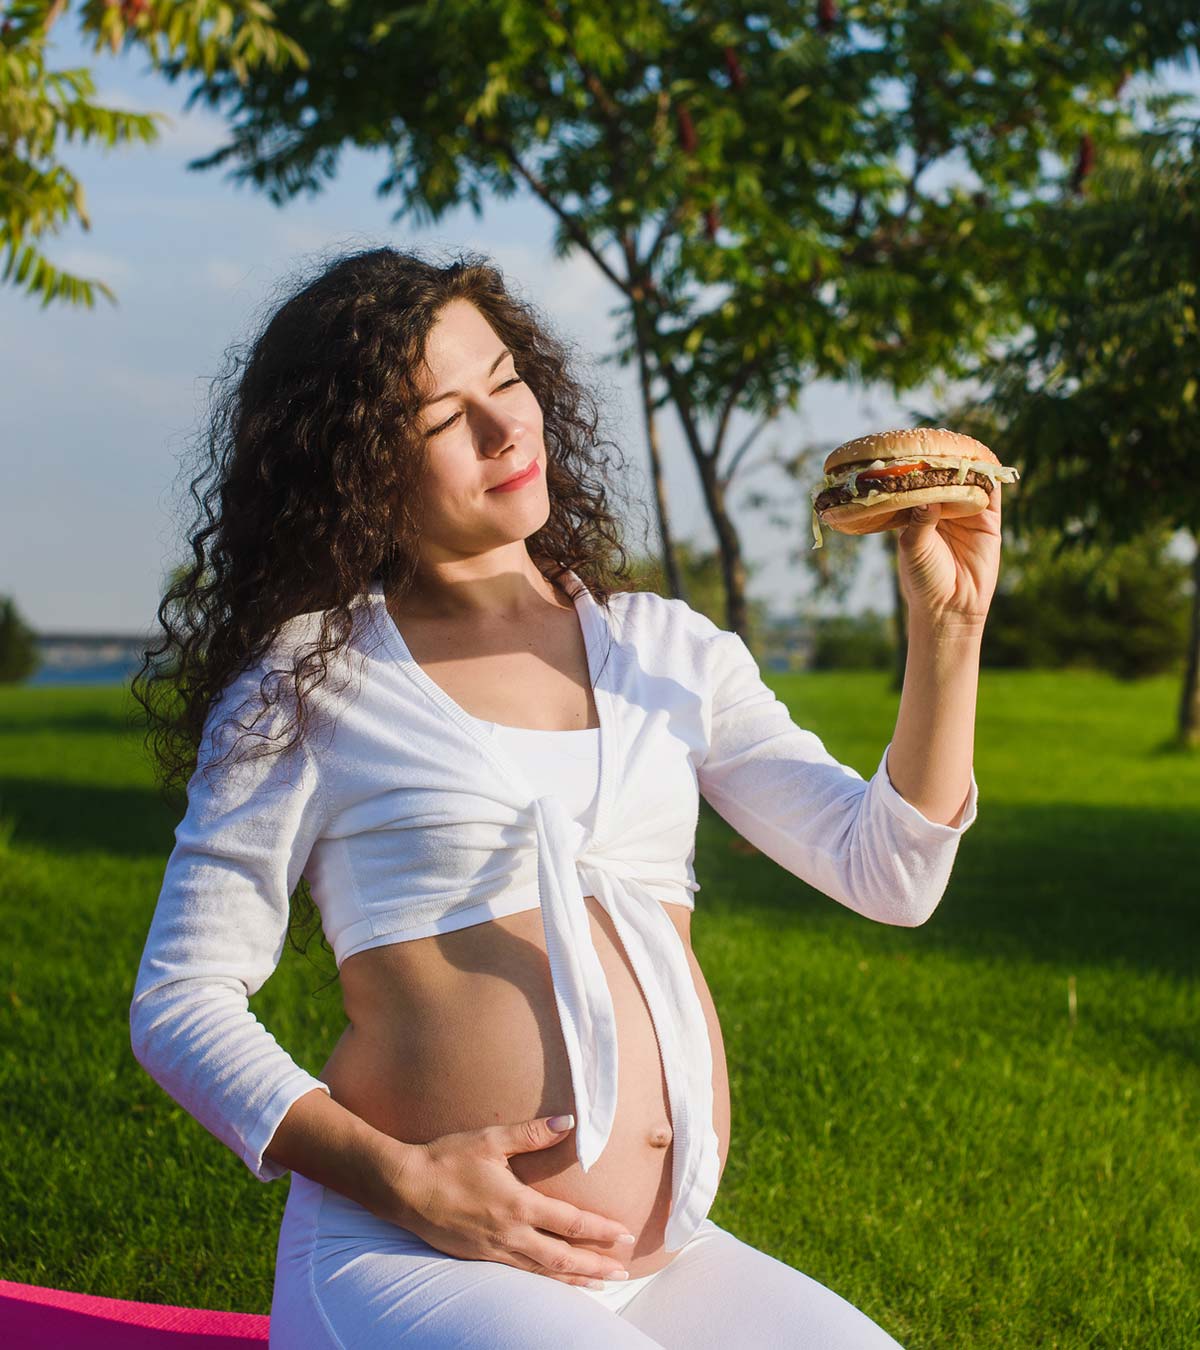 8 Reasons To Limit Junk Food During Pregnancy